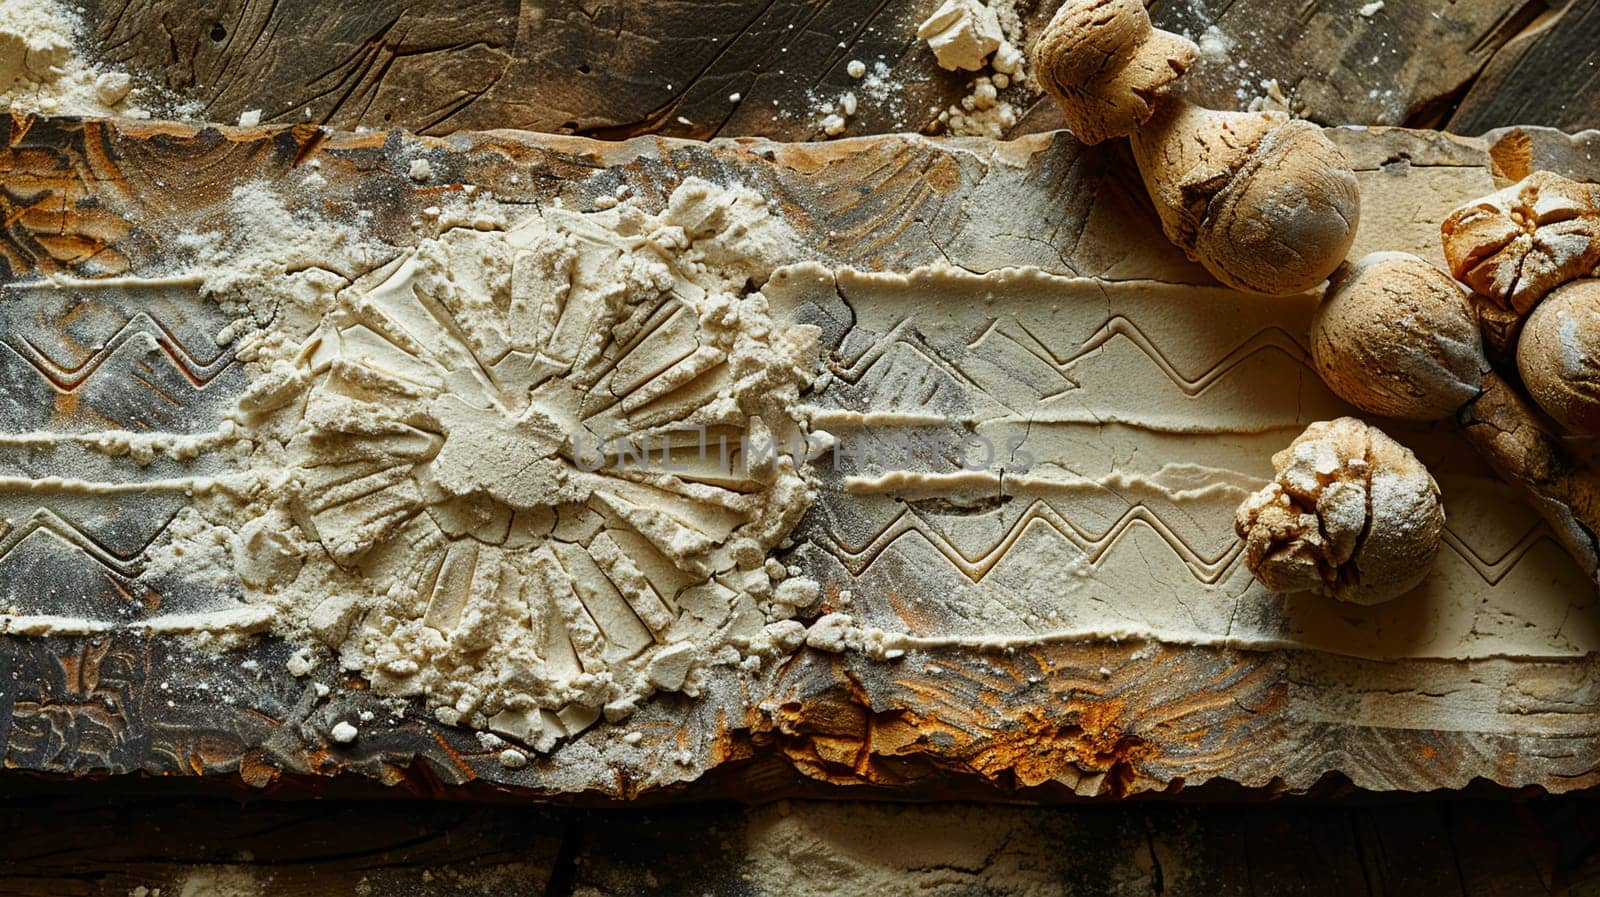 Vodou Veve Symbols Drawn in Flour for a Ceremony The intricate lines spread out by Benzoix